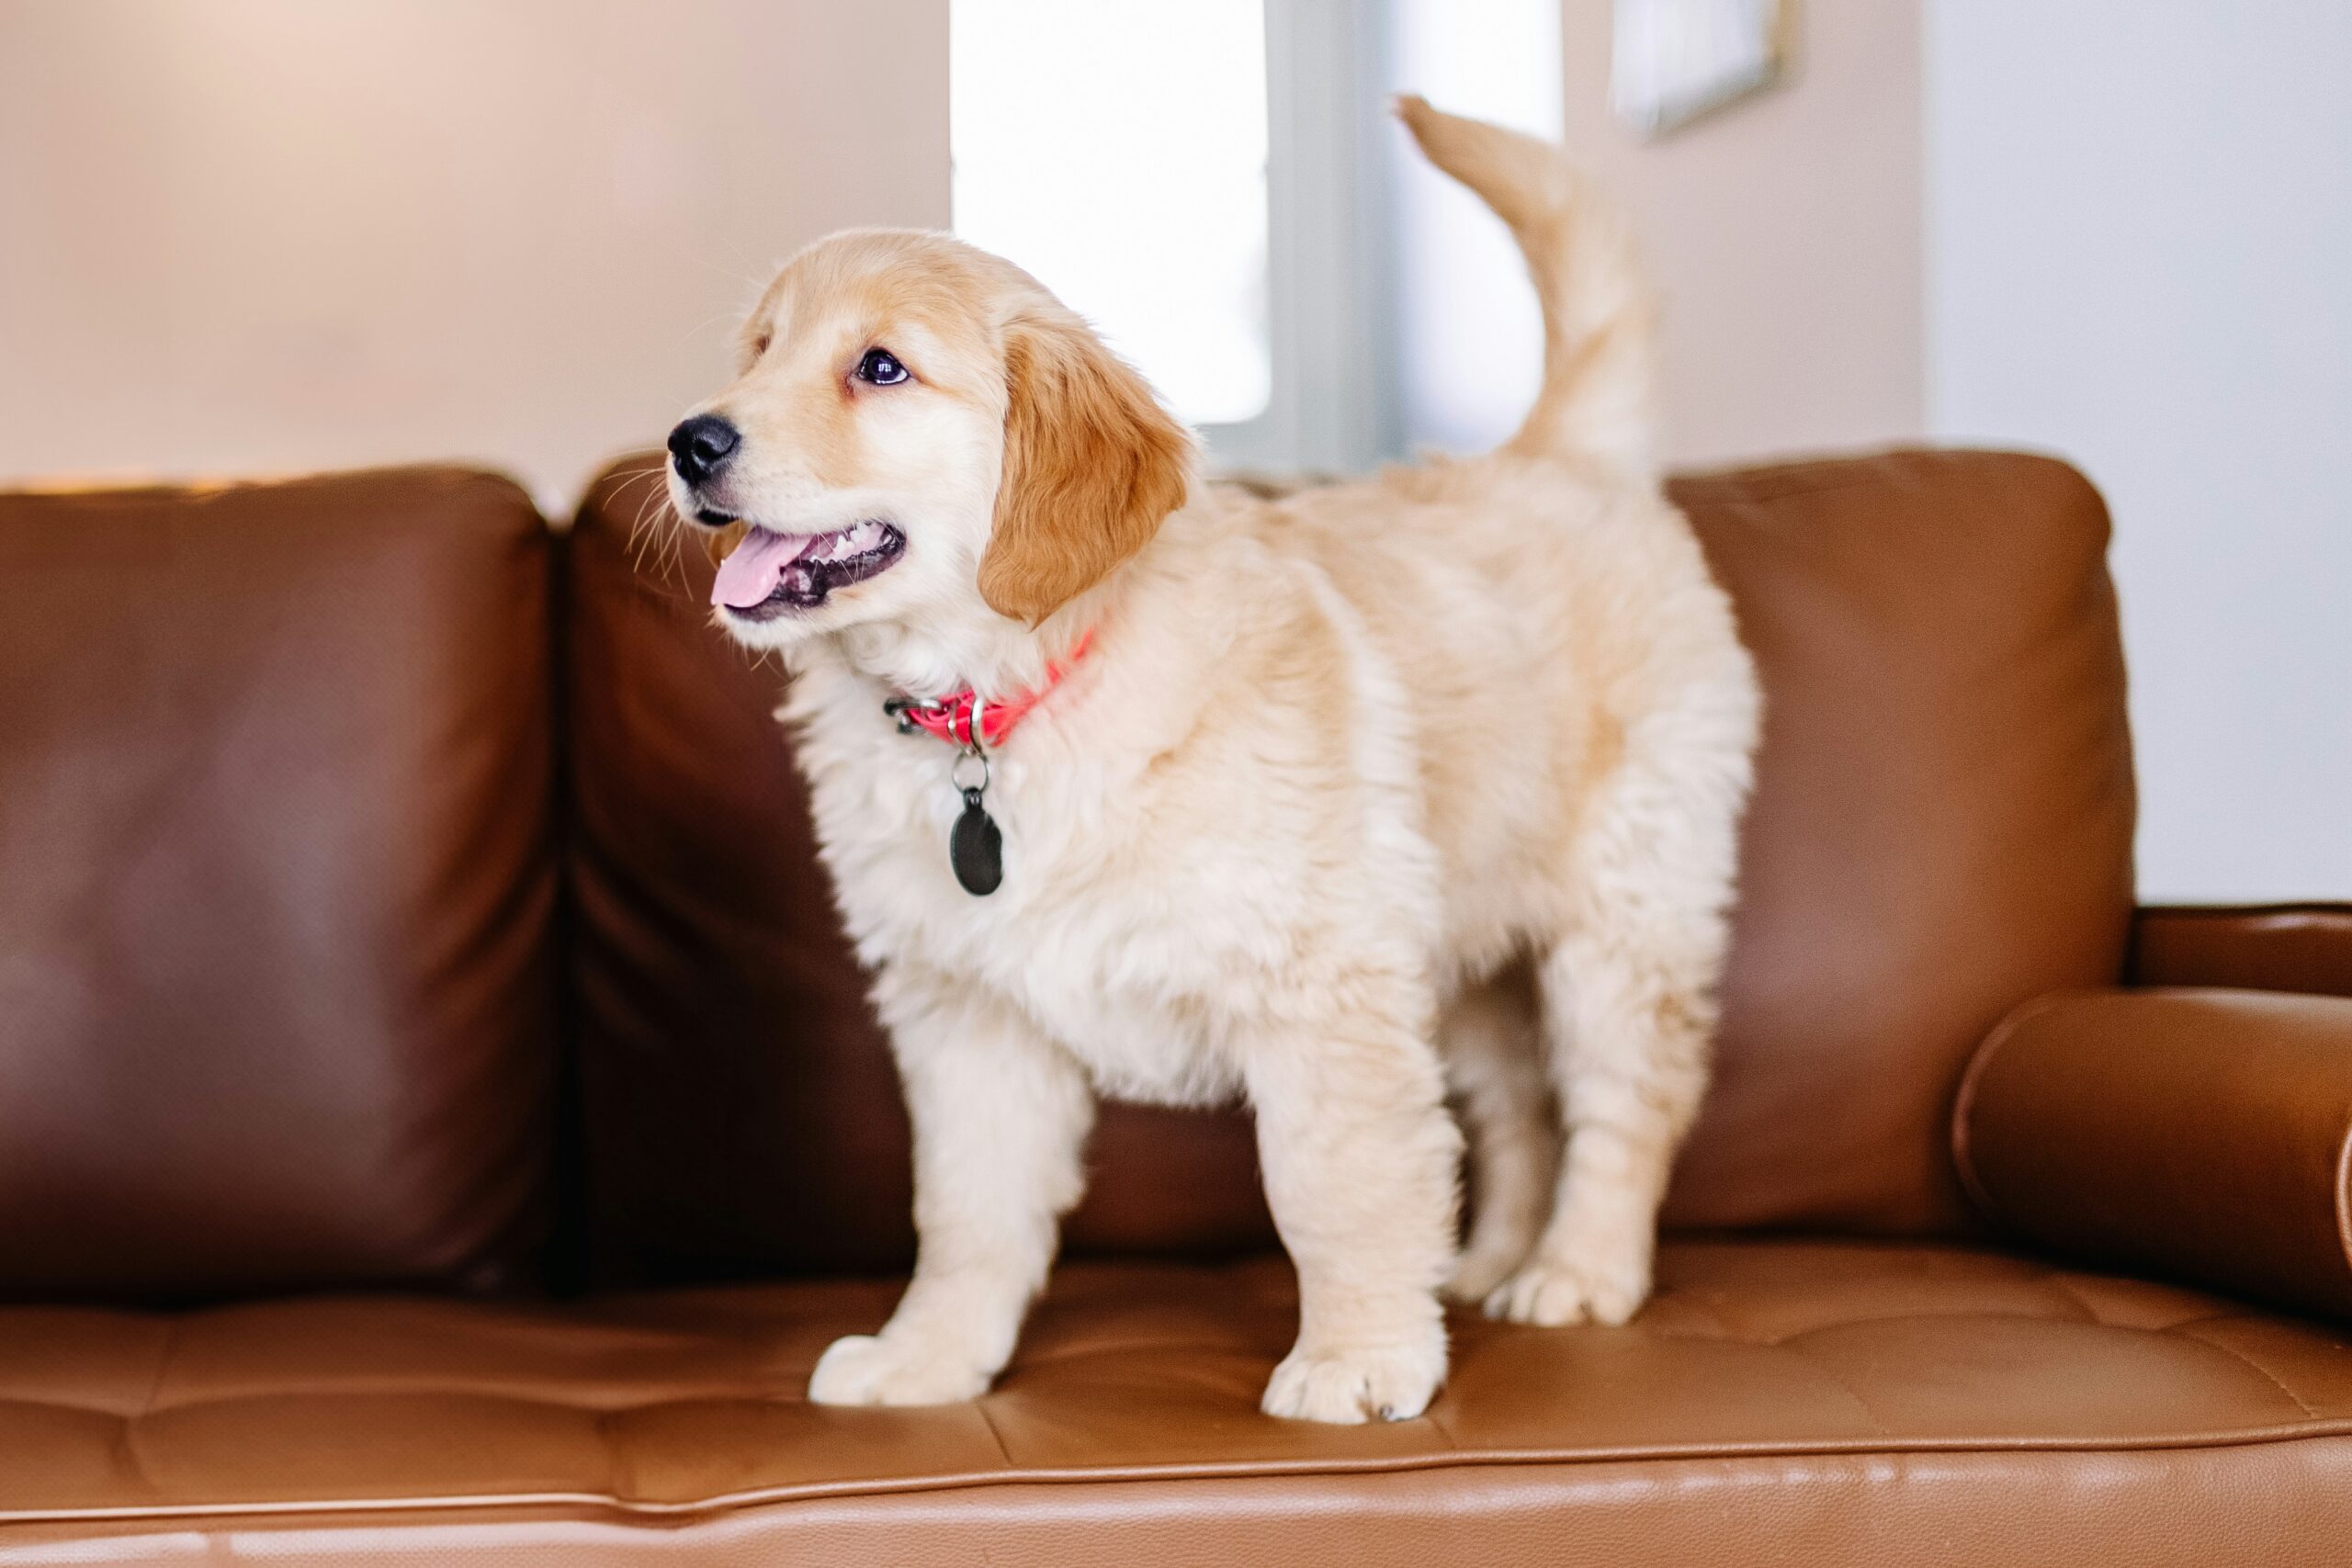 A dog standing on a couch